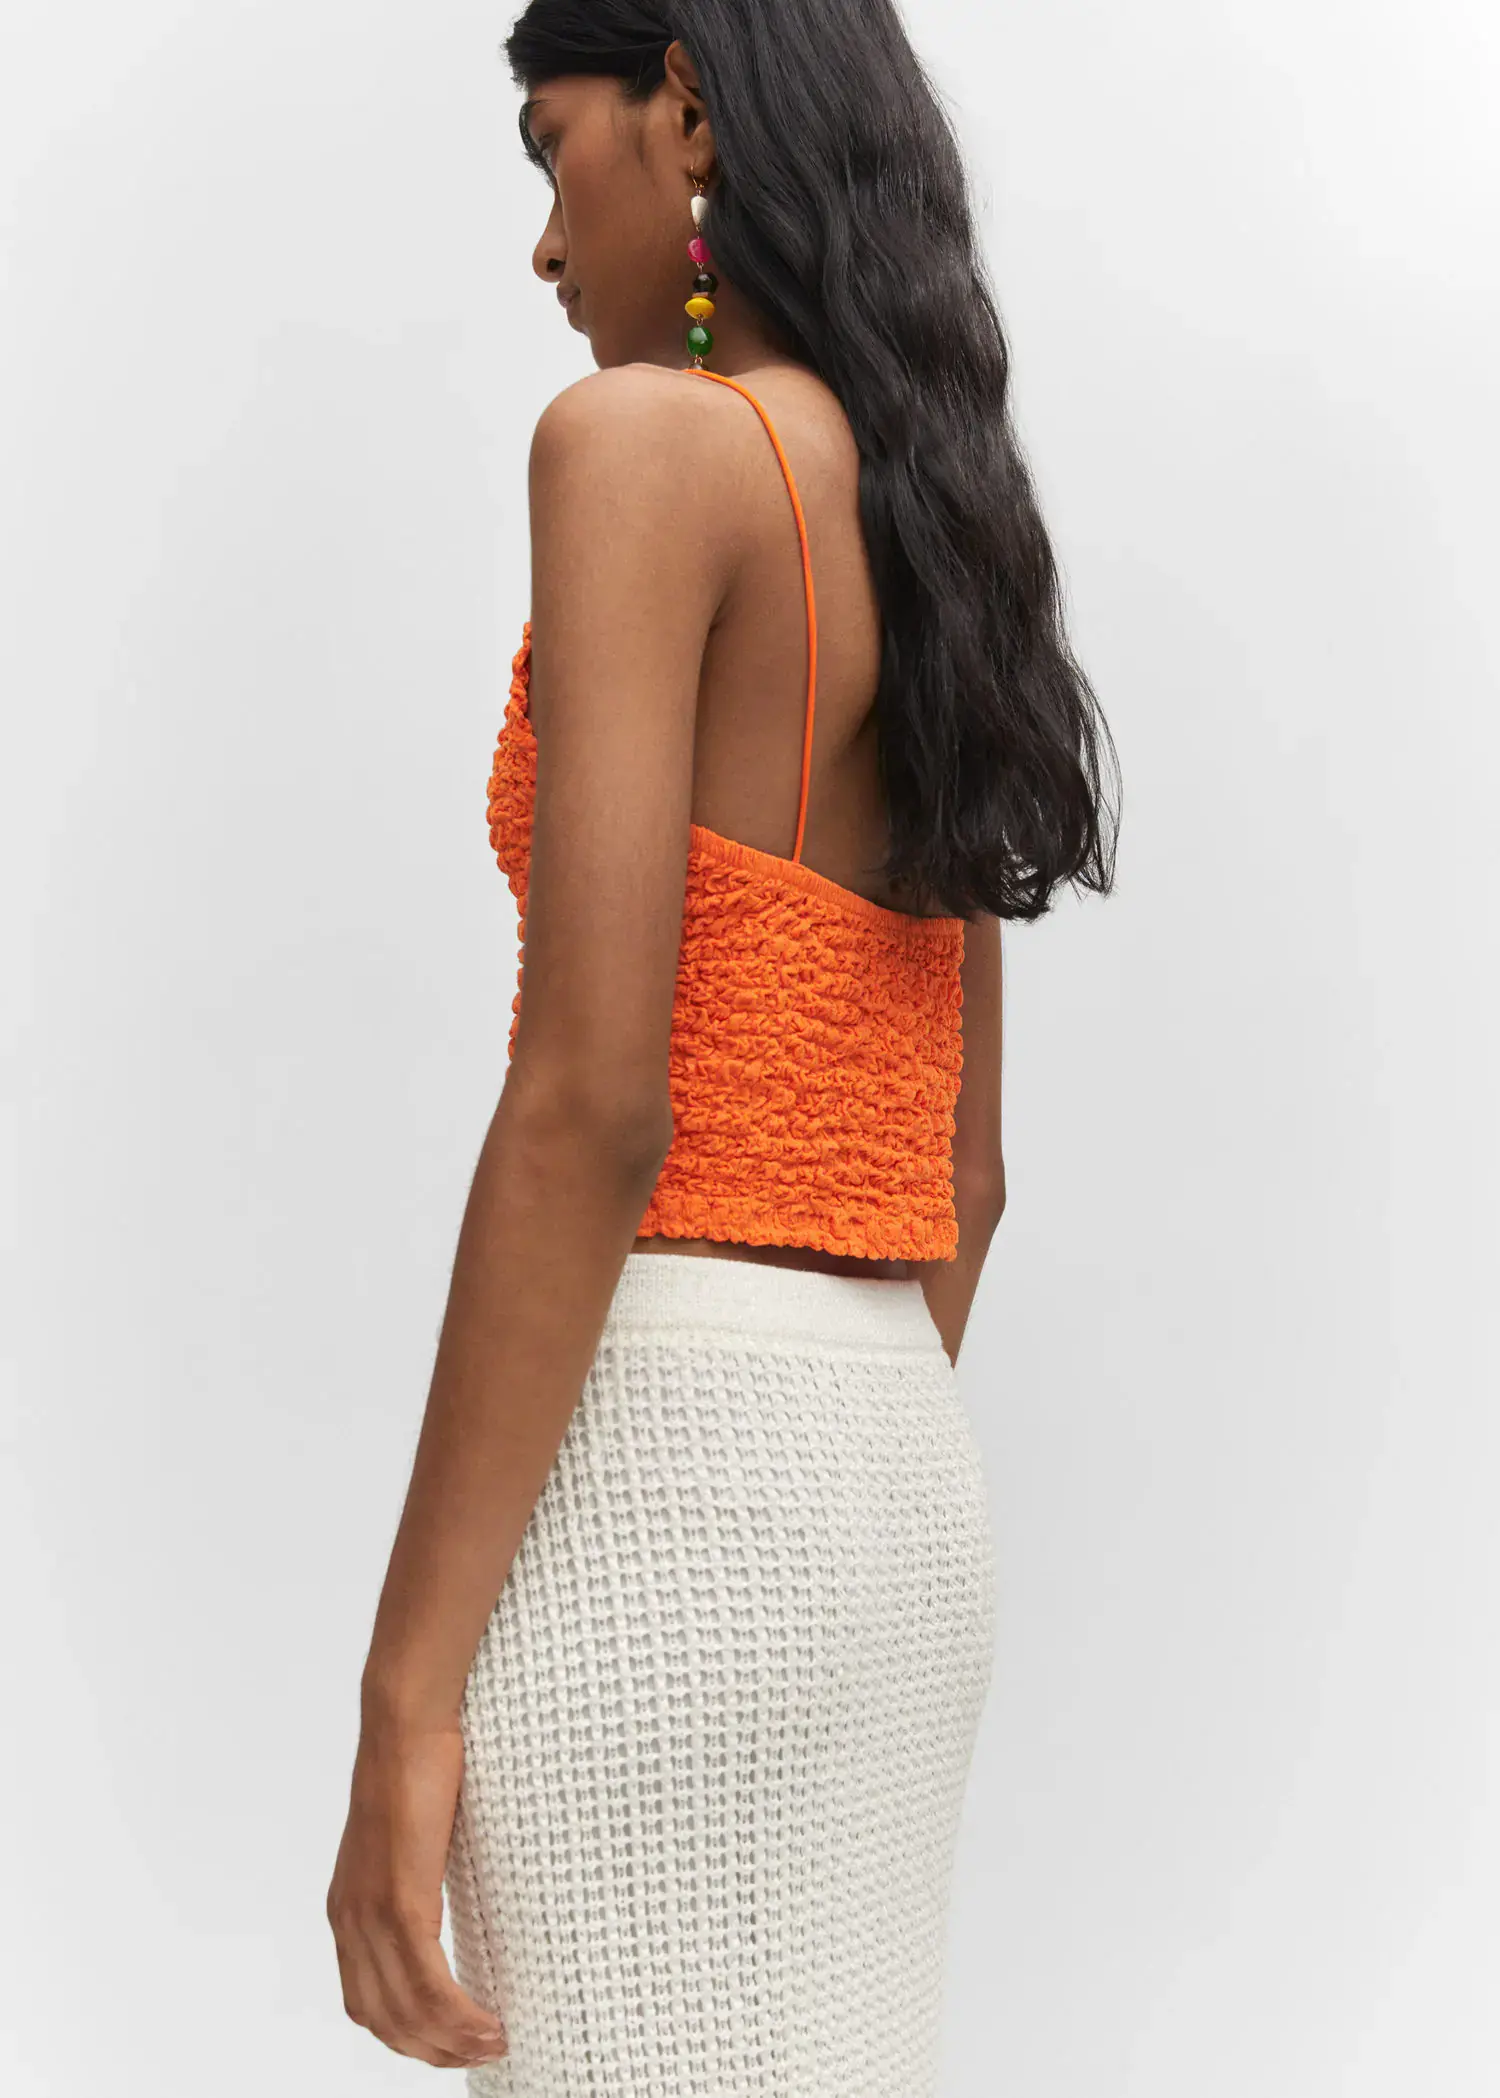 Mango Textured crop top. a woman wearing a white skirt and a bright orange top. 